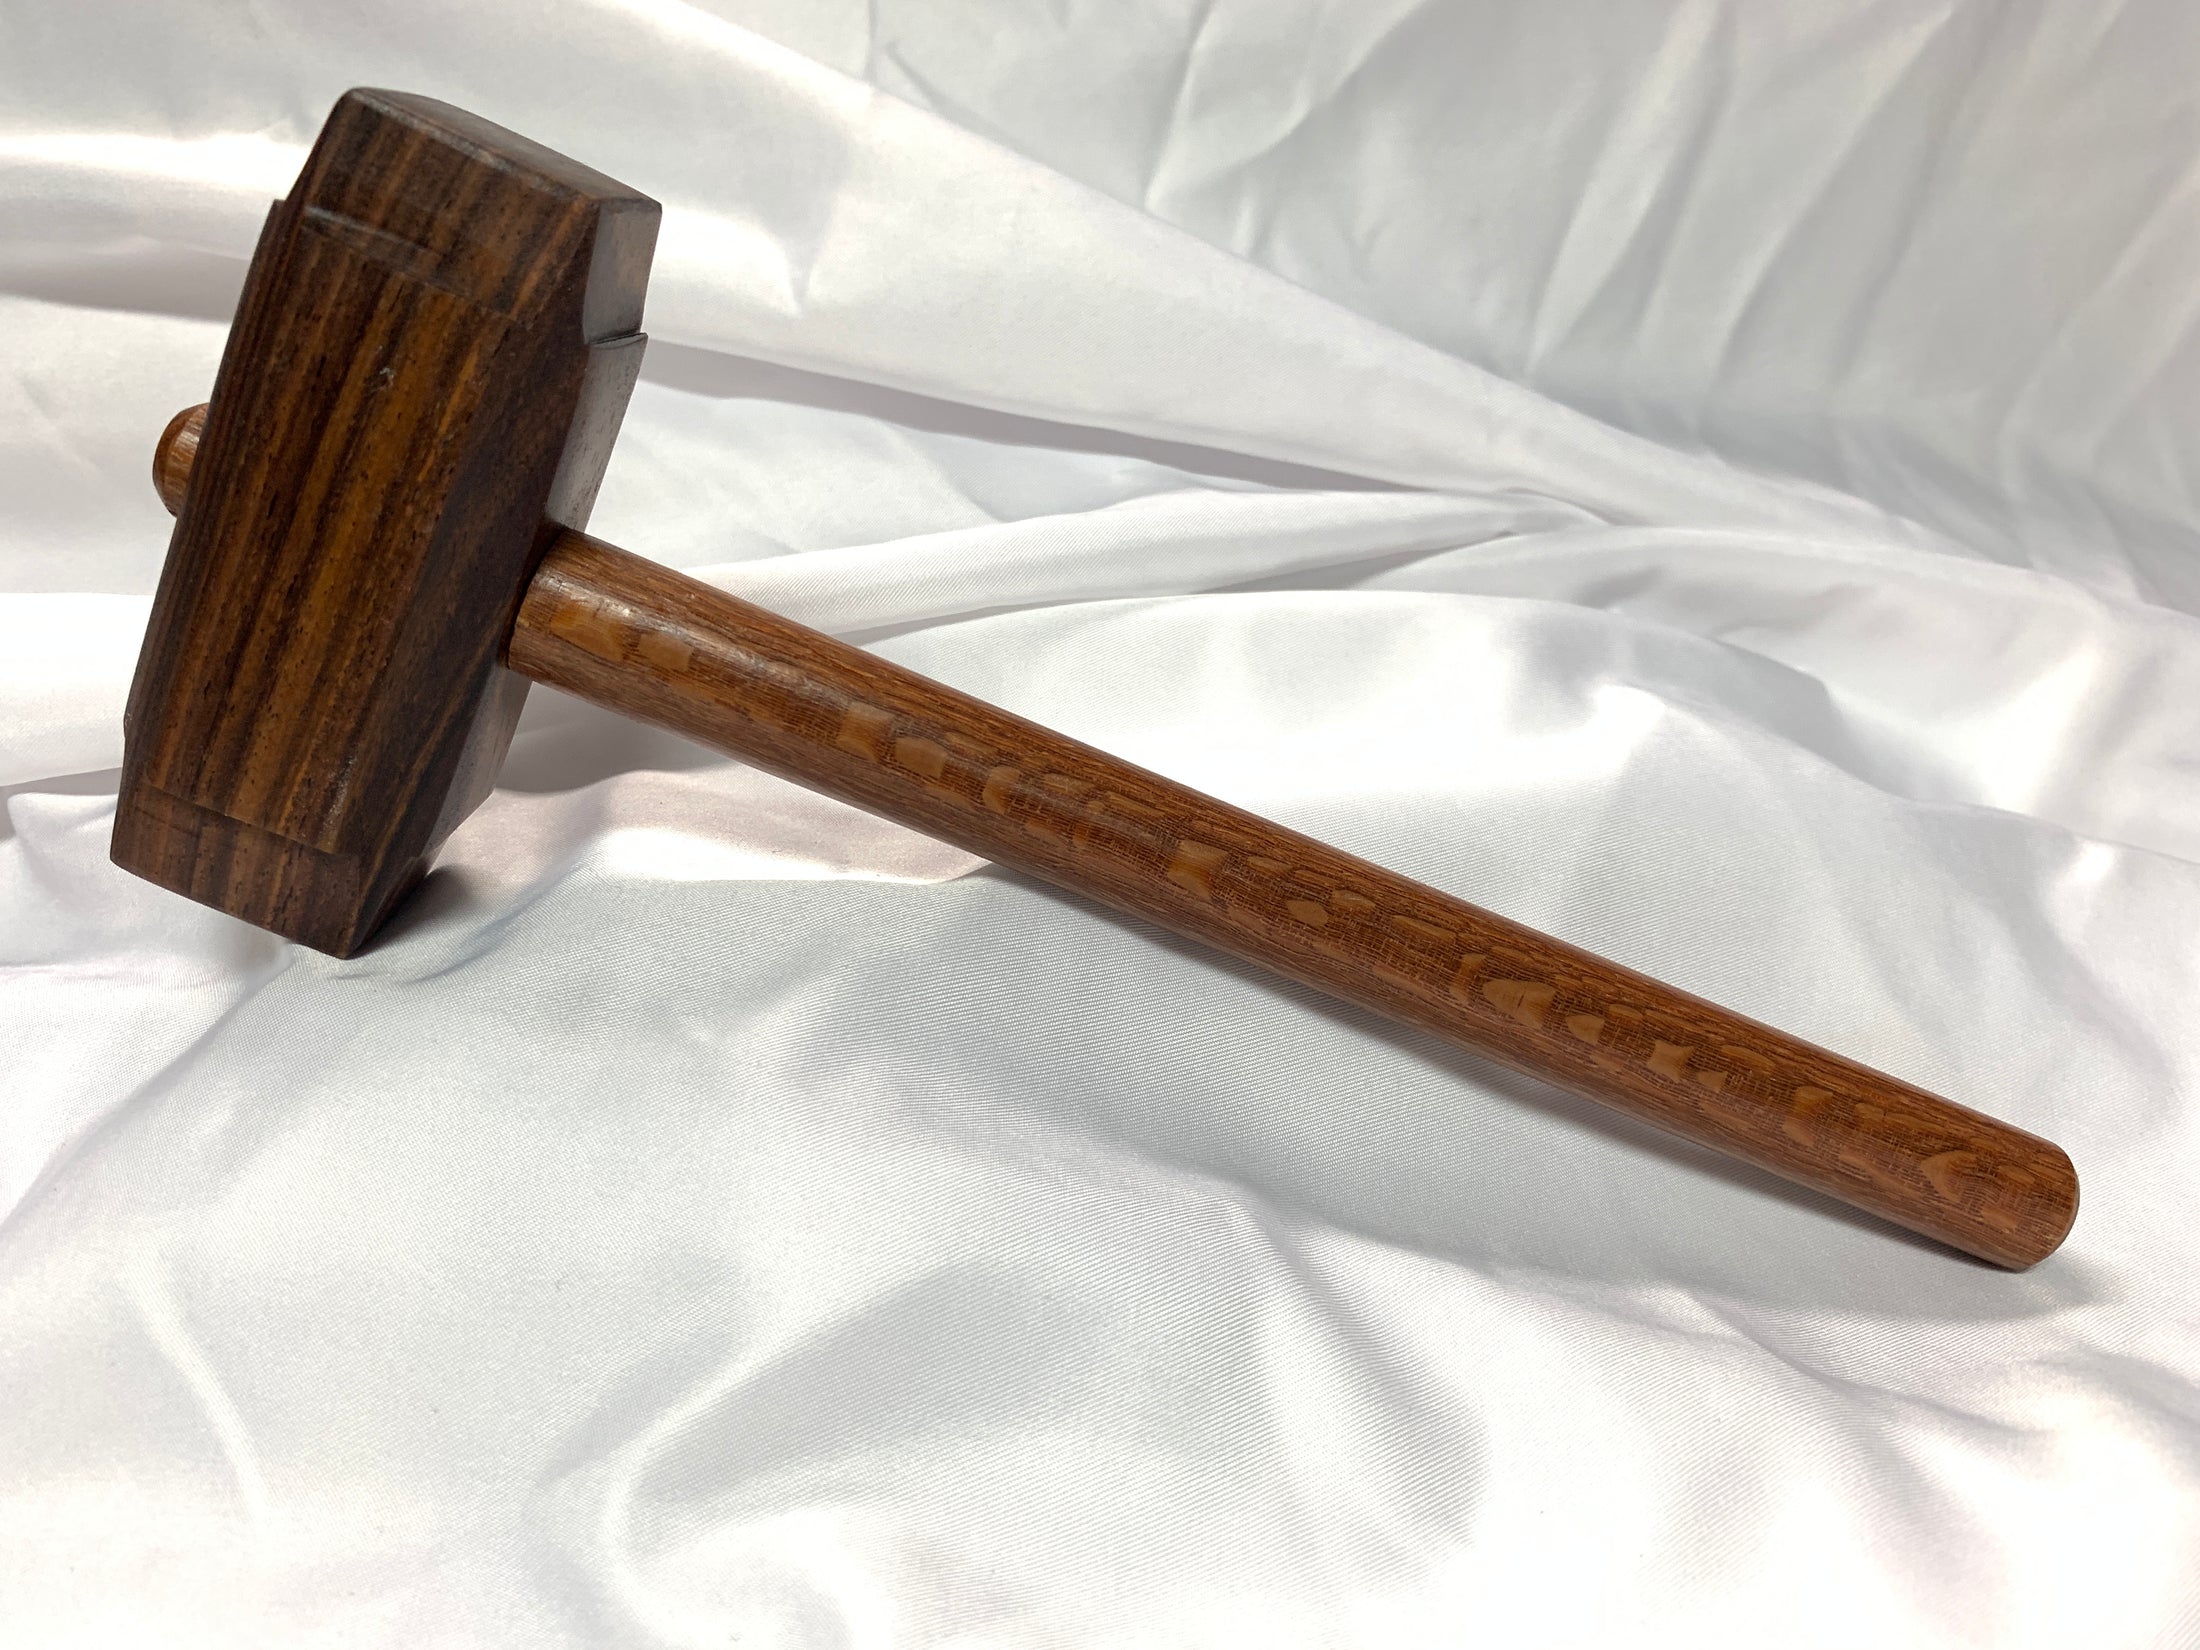 Thors Hammer Woodworking Mallet Cocobolo Head with Leopardwood Handle Kings Fine Woodworking